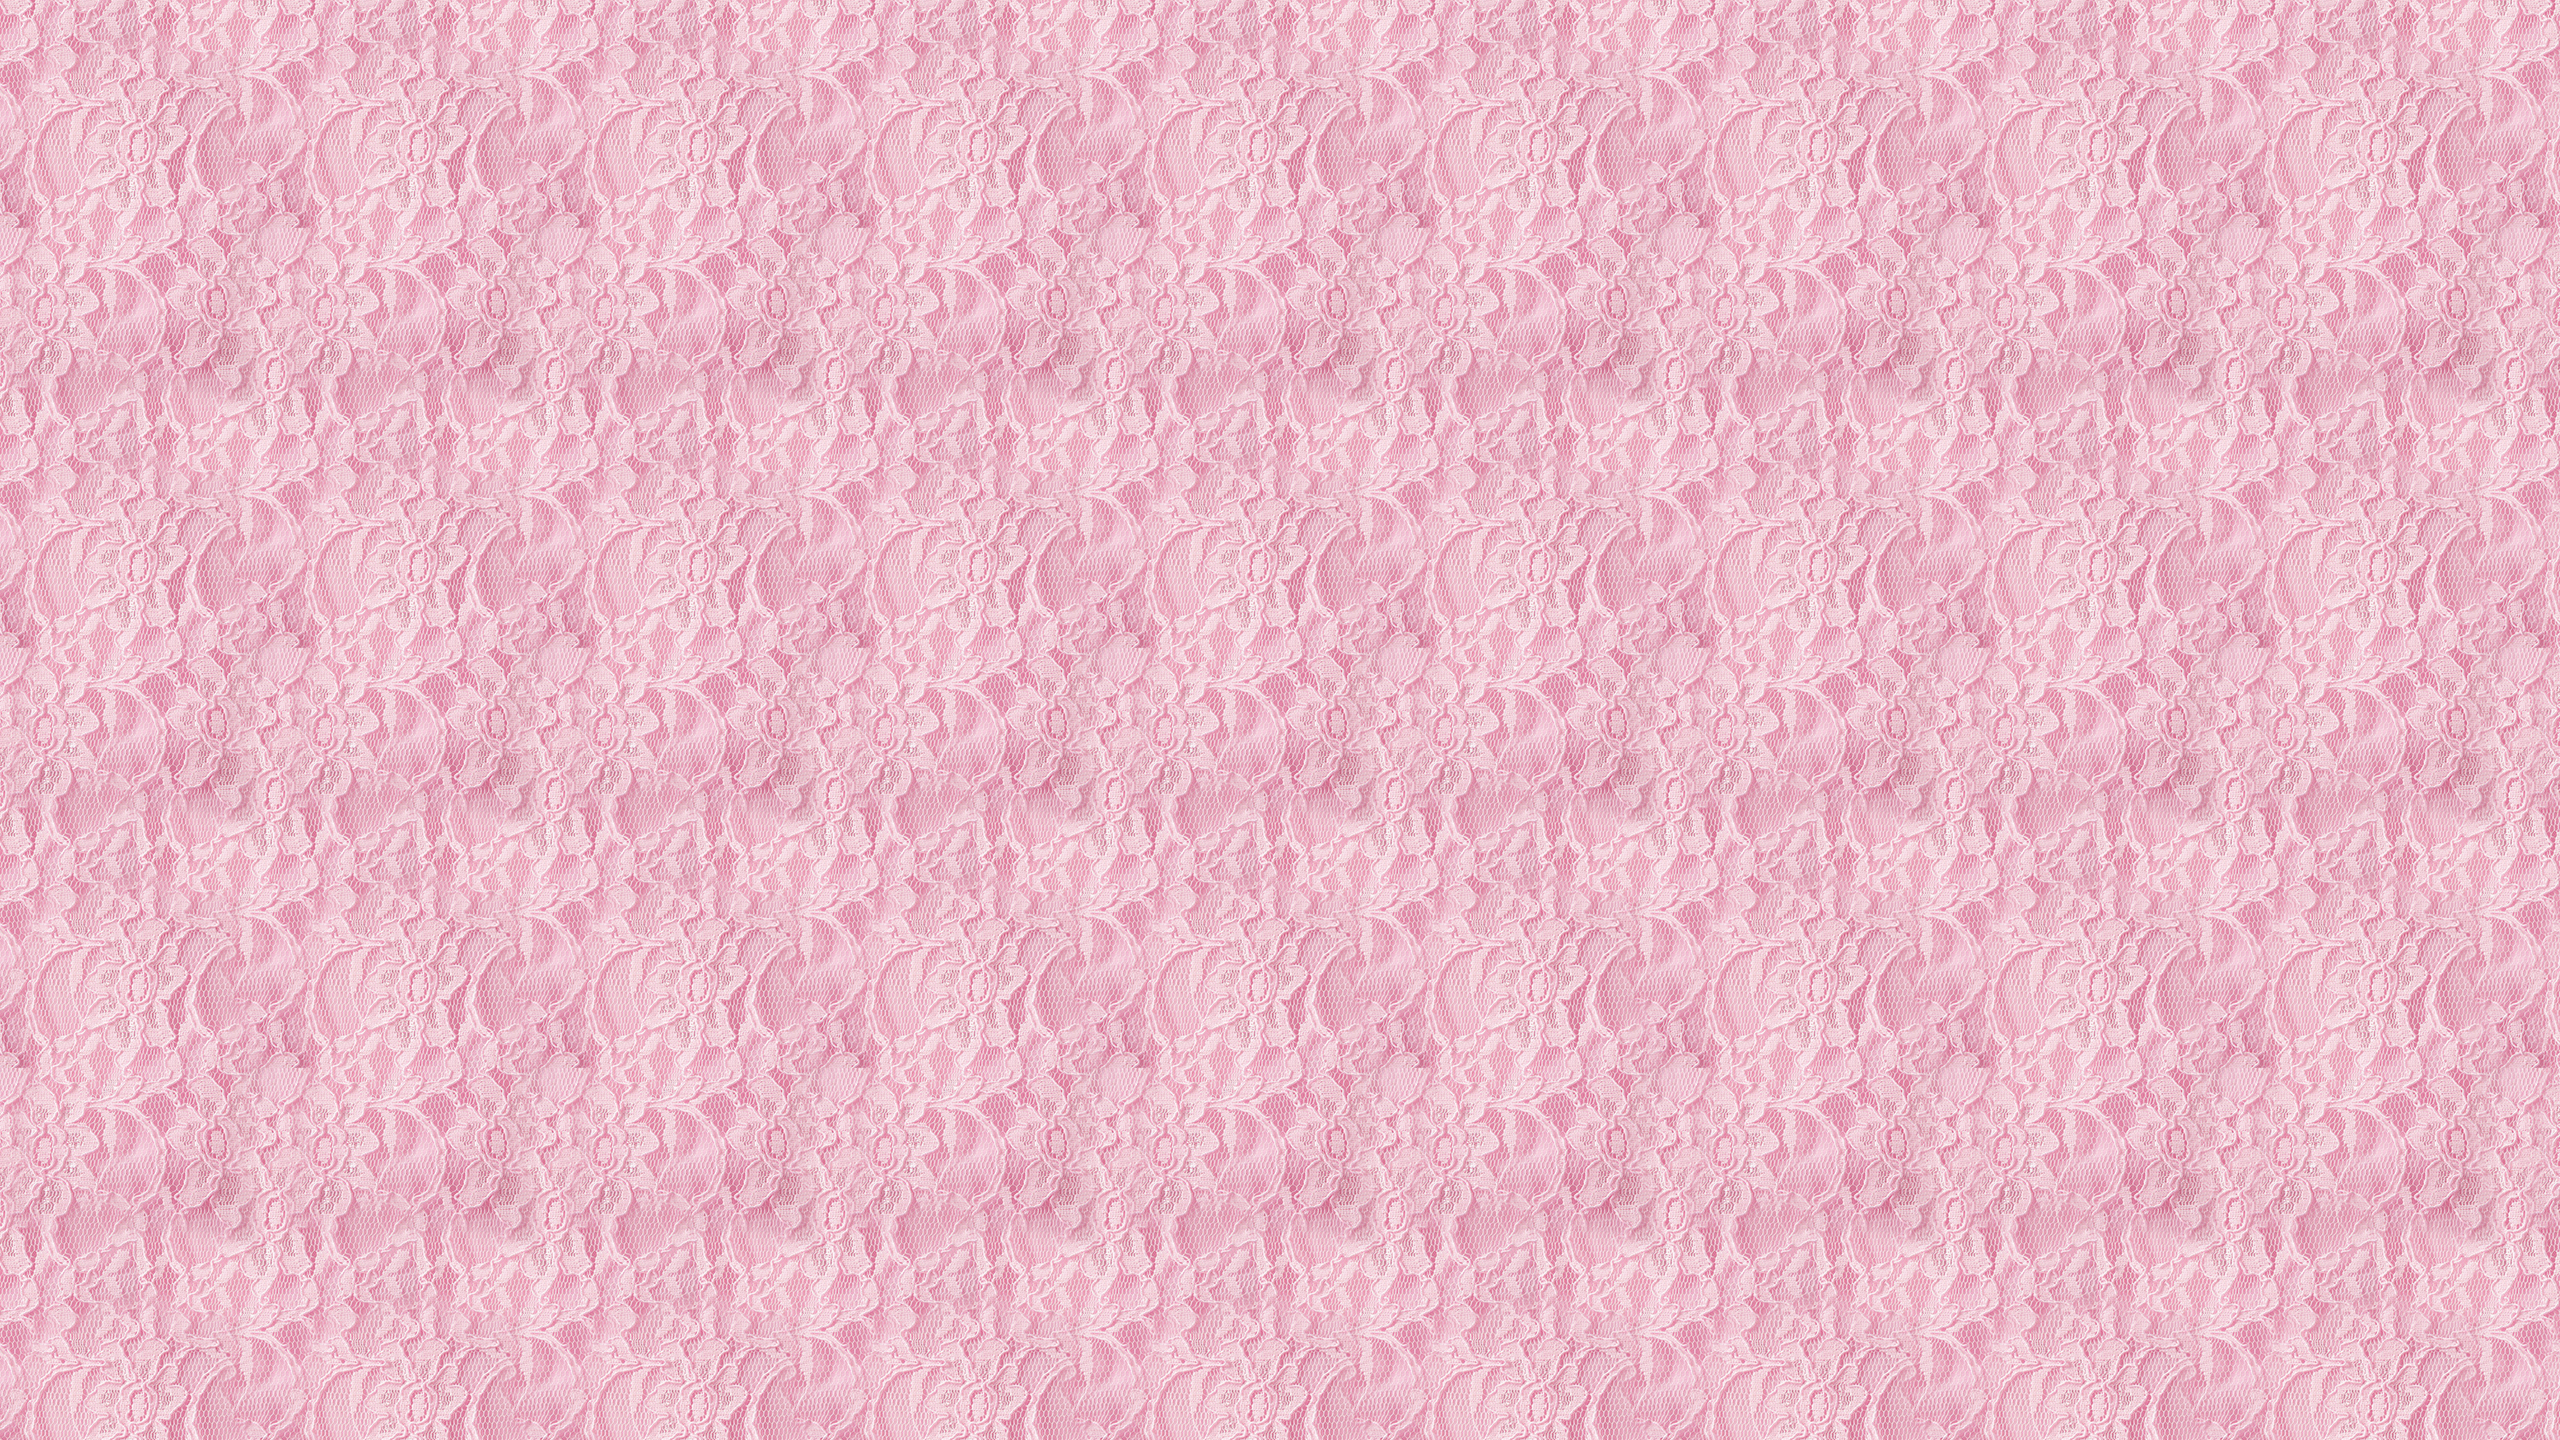 This Pink Lace Desktop Wallpaper Is Easy Just Save The